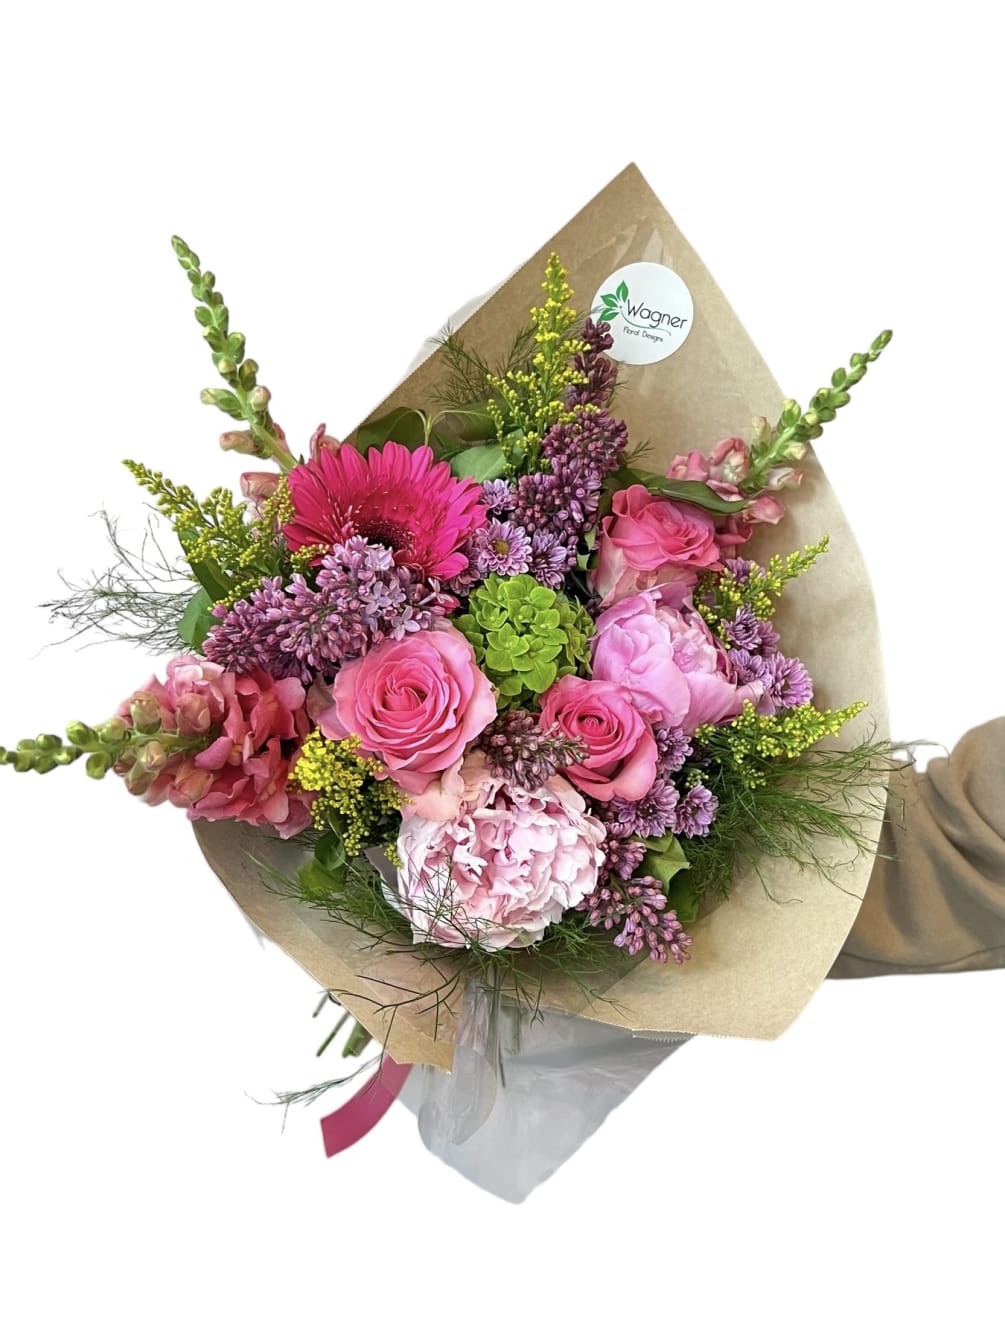 Light pink roses, light pink peony, pink snapdragons, yellow aster, lilac, hot